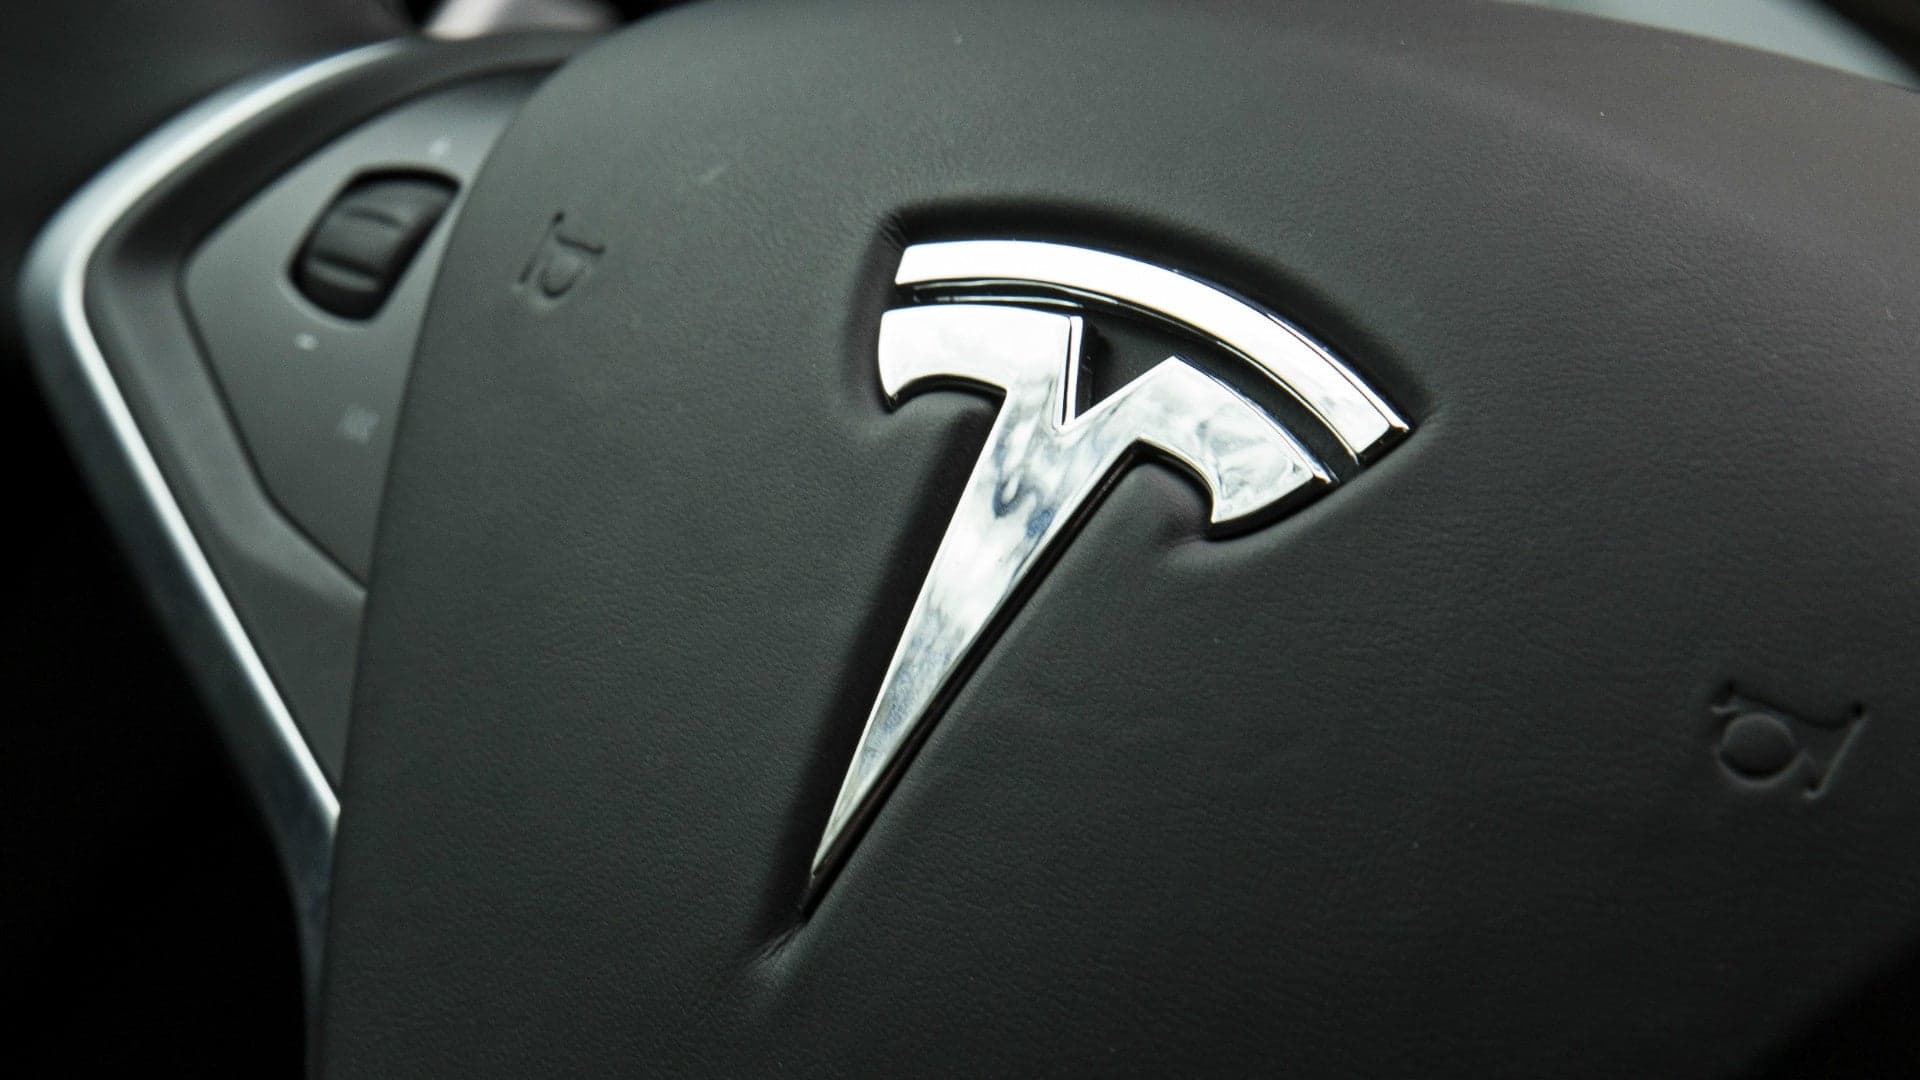 Upcoming Tesla Model Y Crossover Will Start at $40,000 or Less: Report